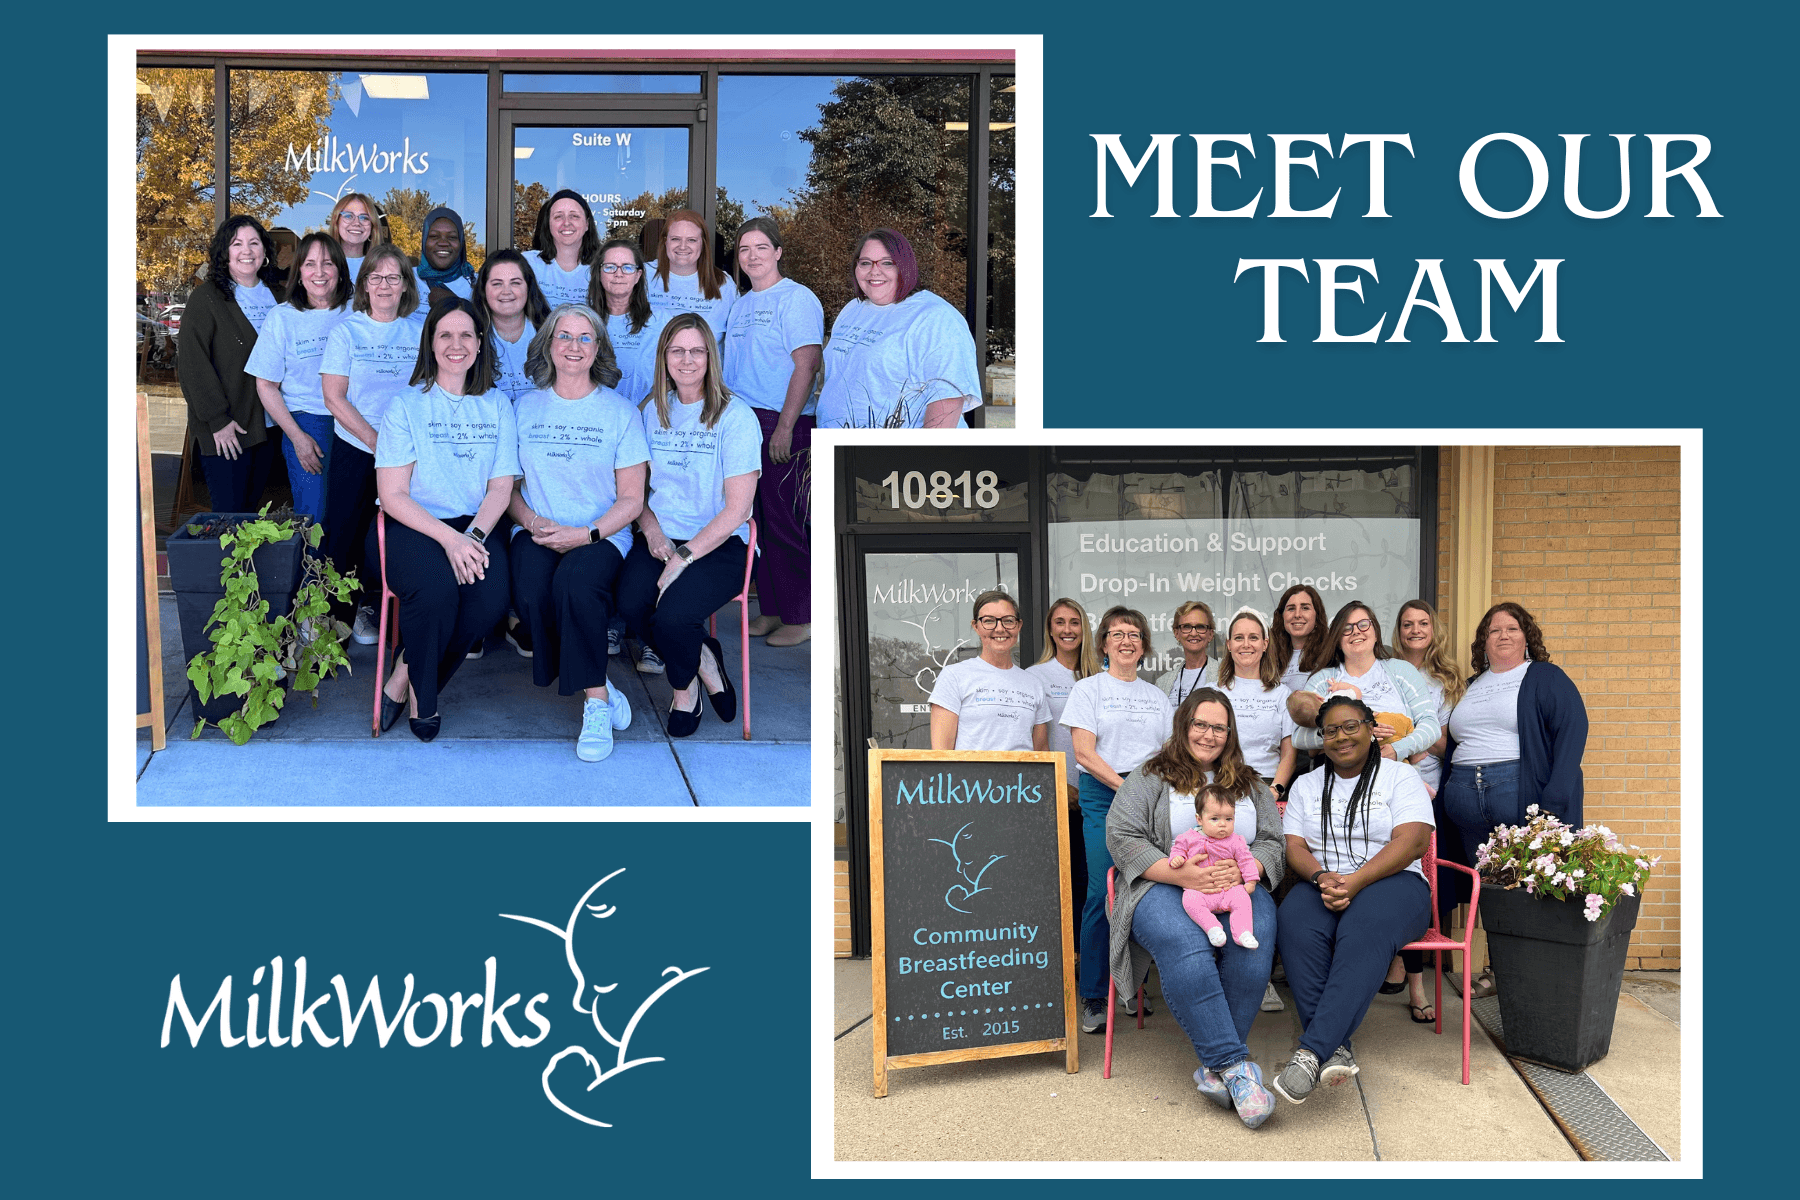 The MilkWorks team poses together outside their offices, showcasing their commitment to breastfeeding support. The image features two group shots with the staff in matching shirts, emphasizing unity and community care